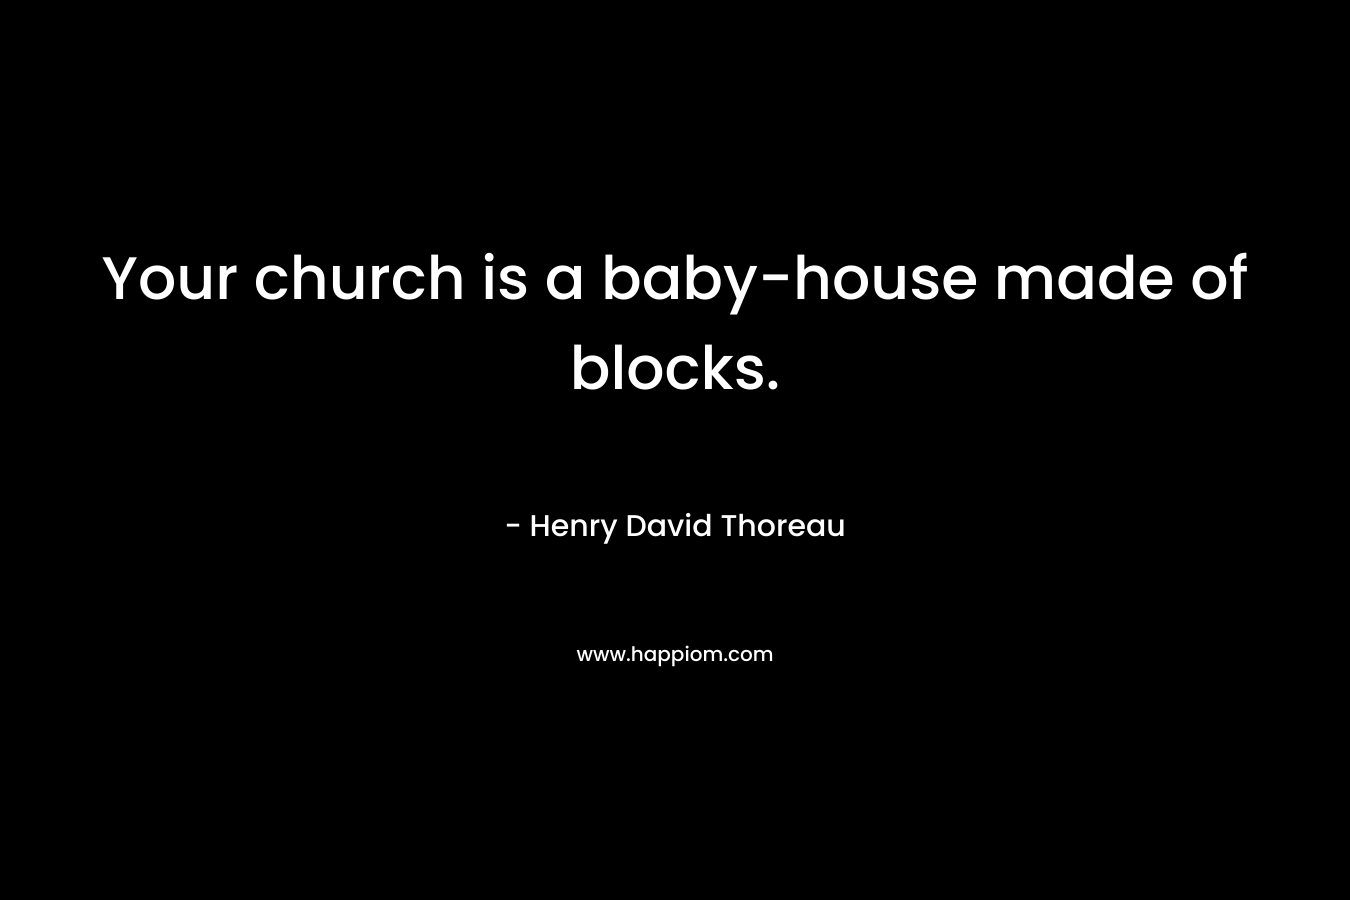 Your church is a baby-house made of blocks. – Henry David Thoreau